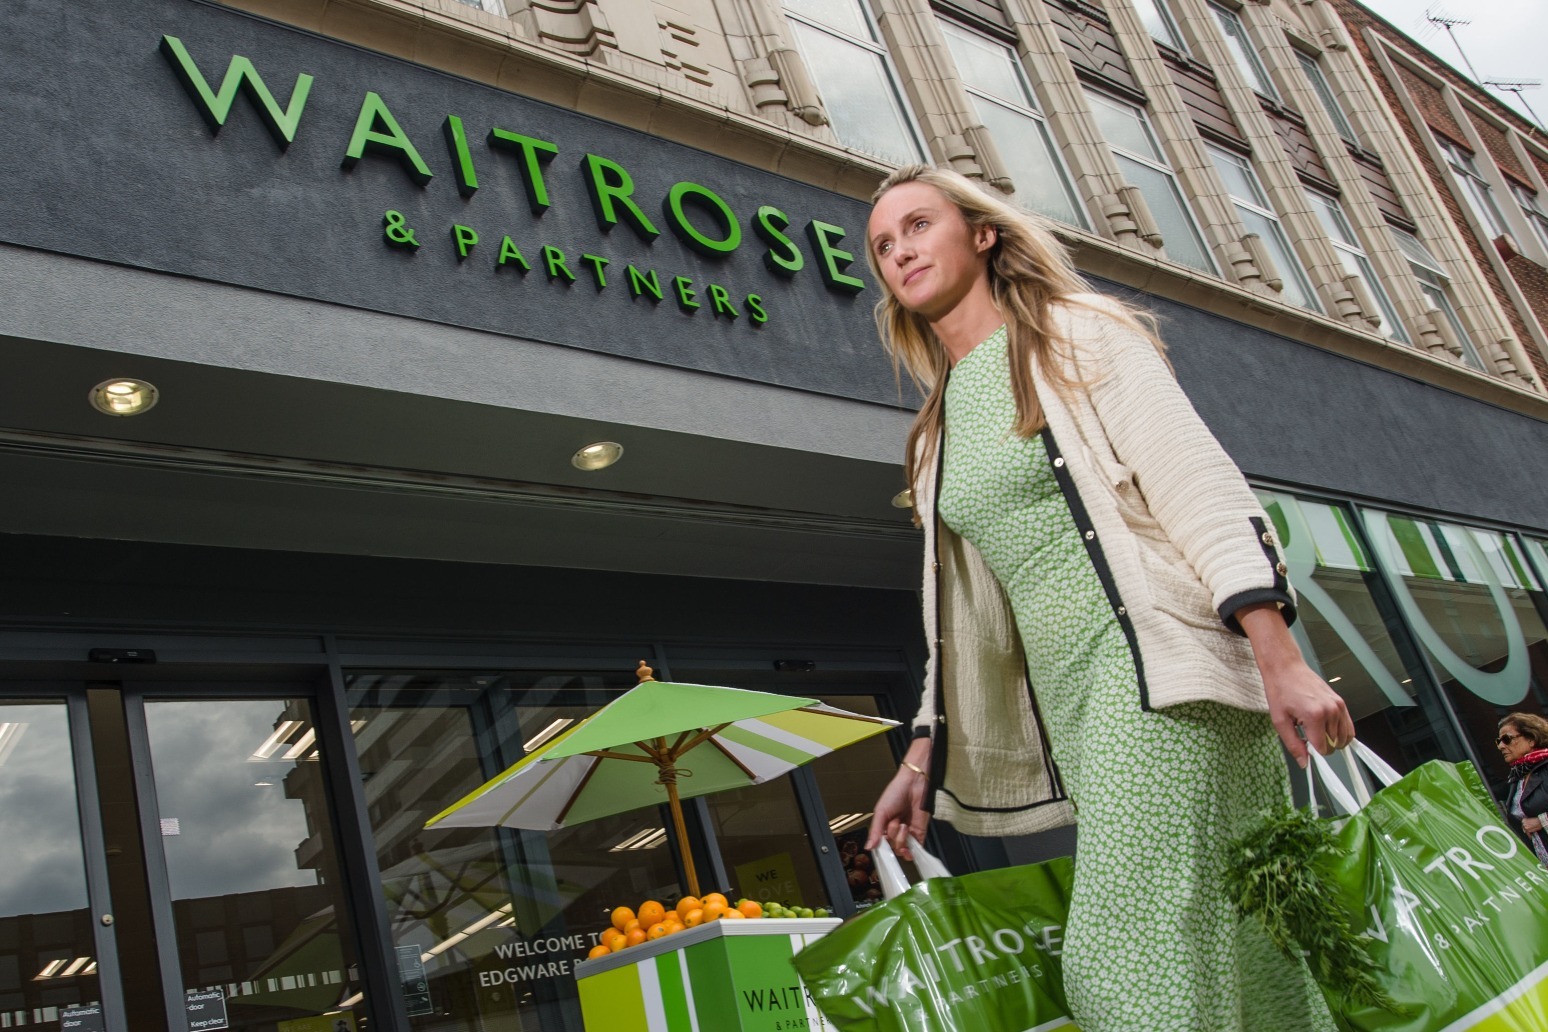 Waitrose admits to land deals blocking rivals opening nearby shops 